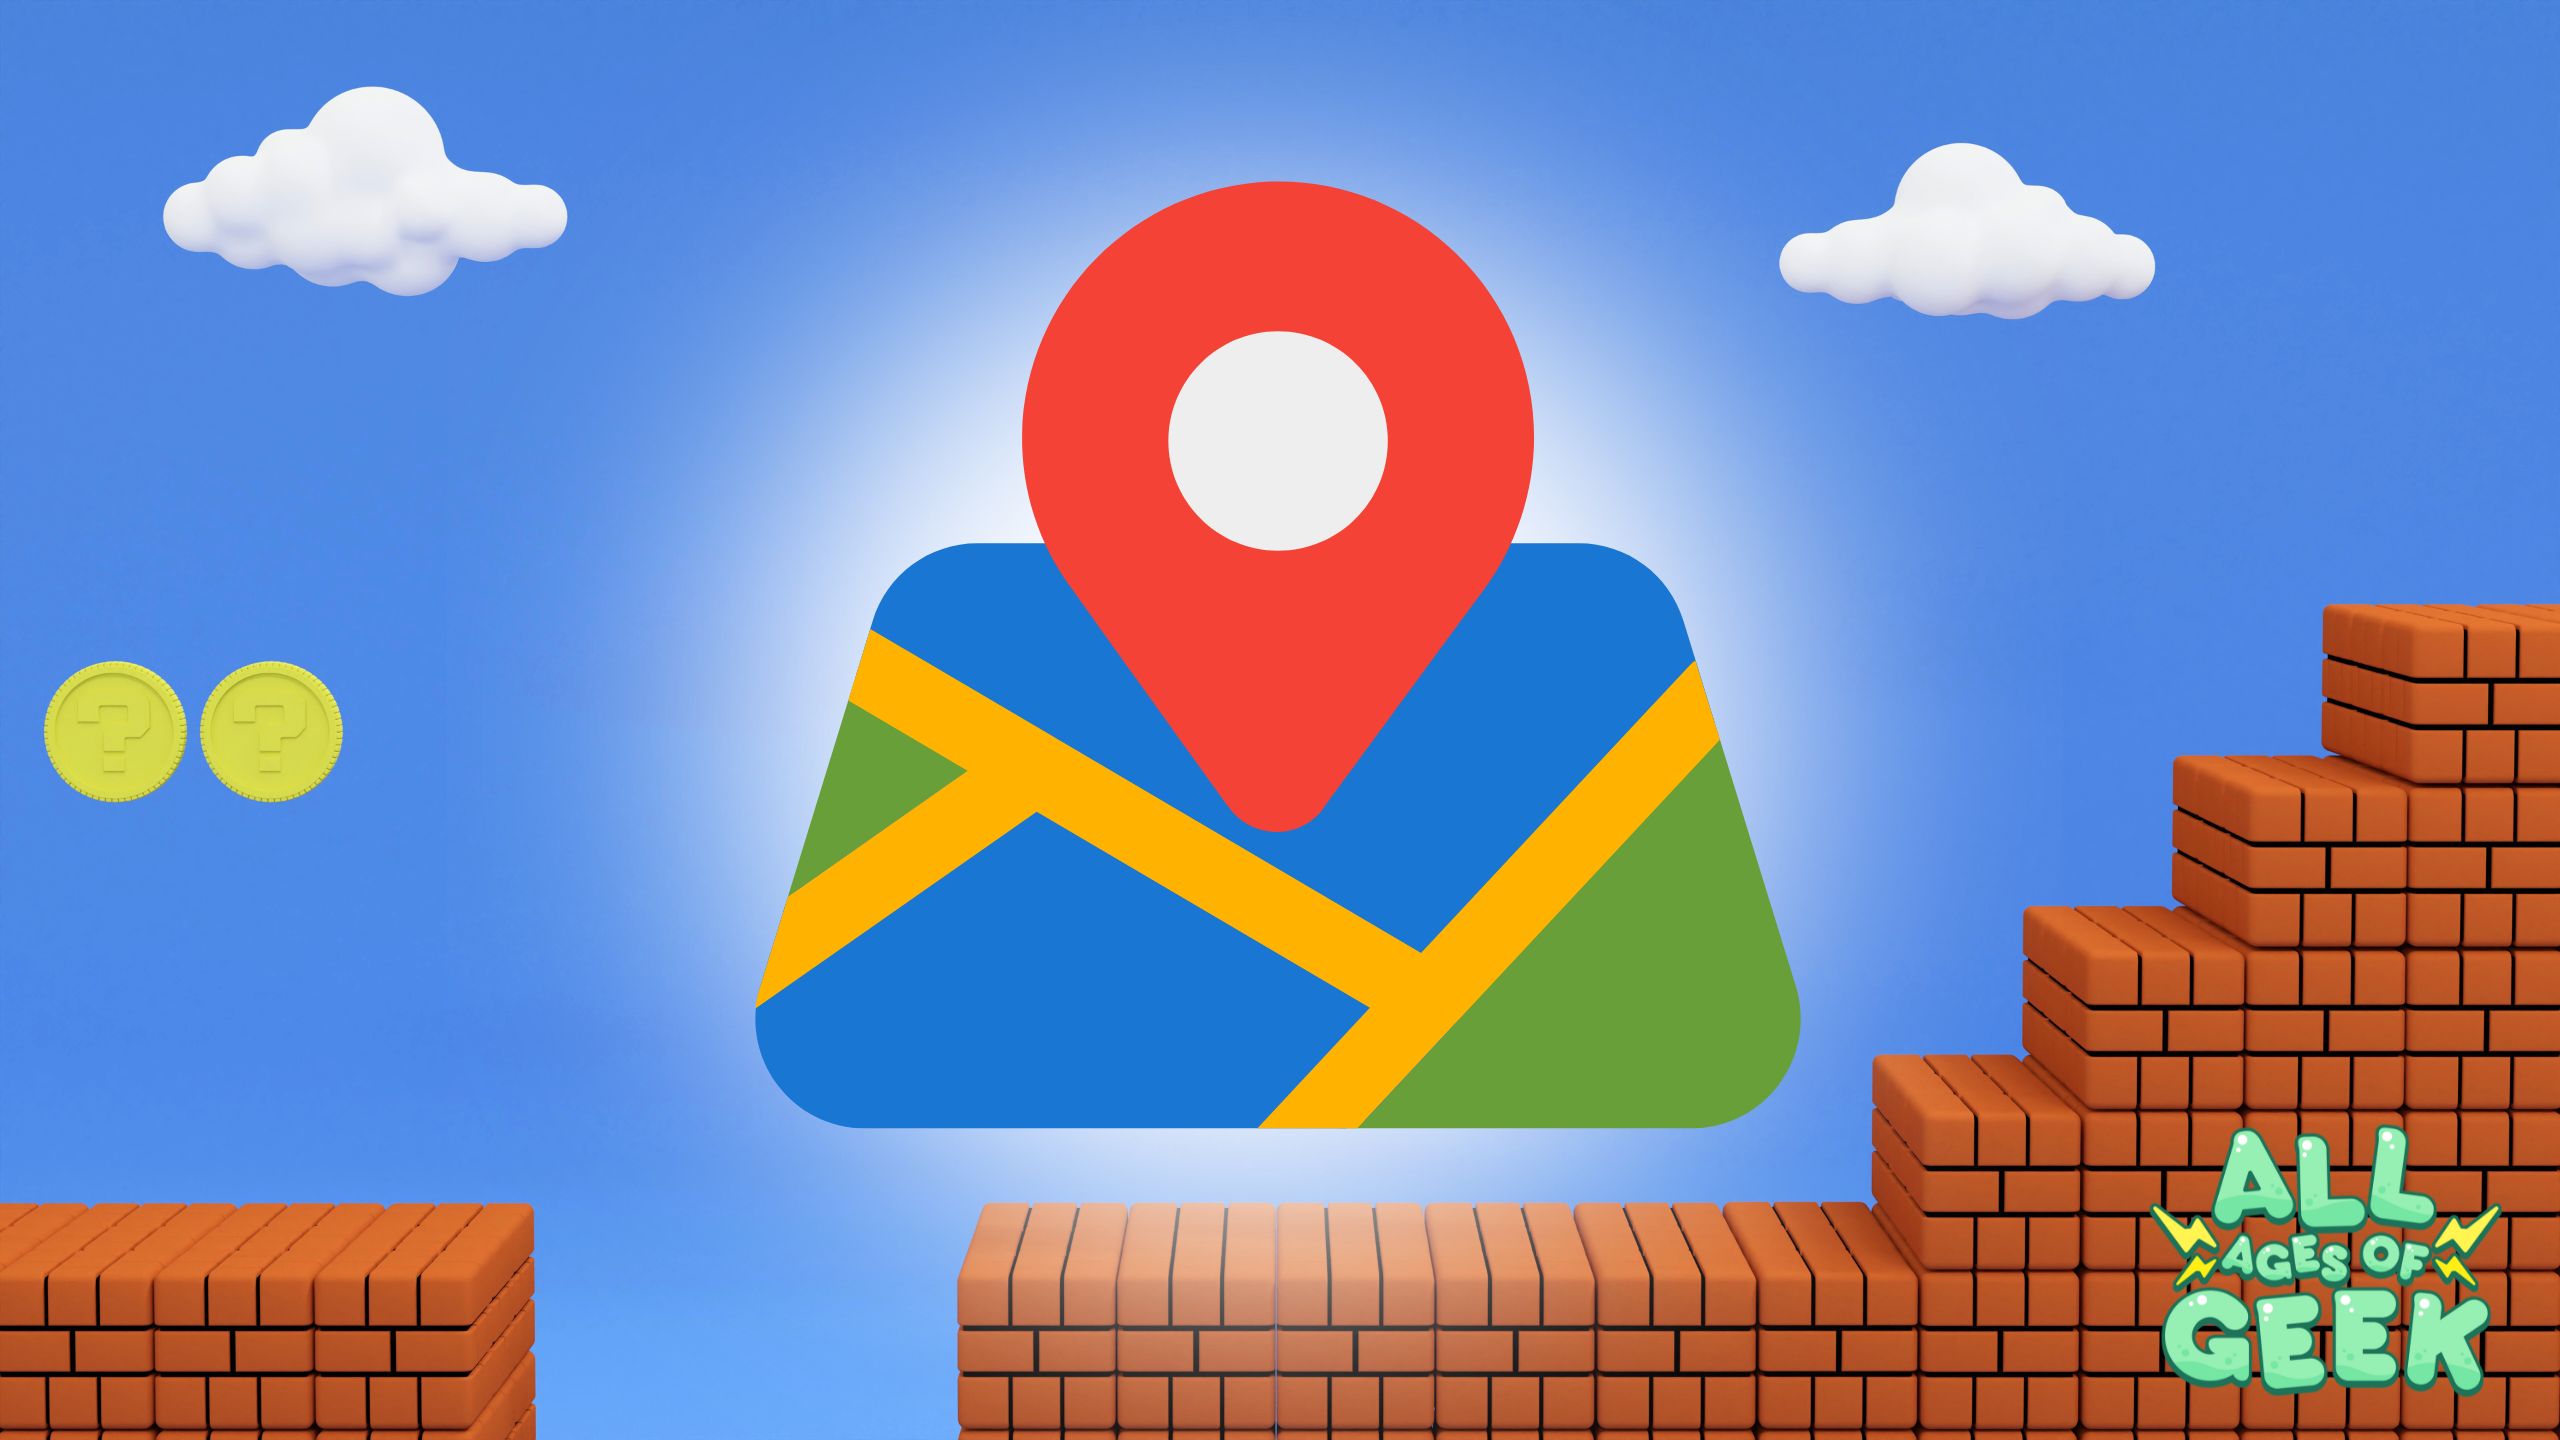 Guide to Finding Geek Culture Spots on Google Maps